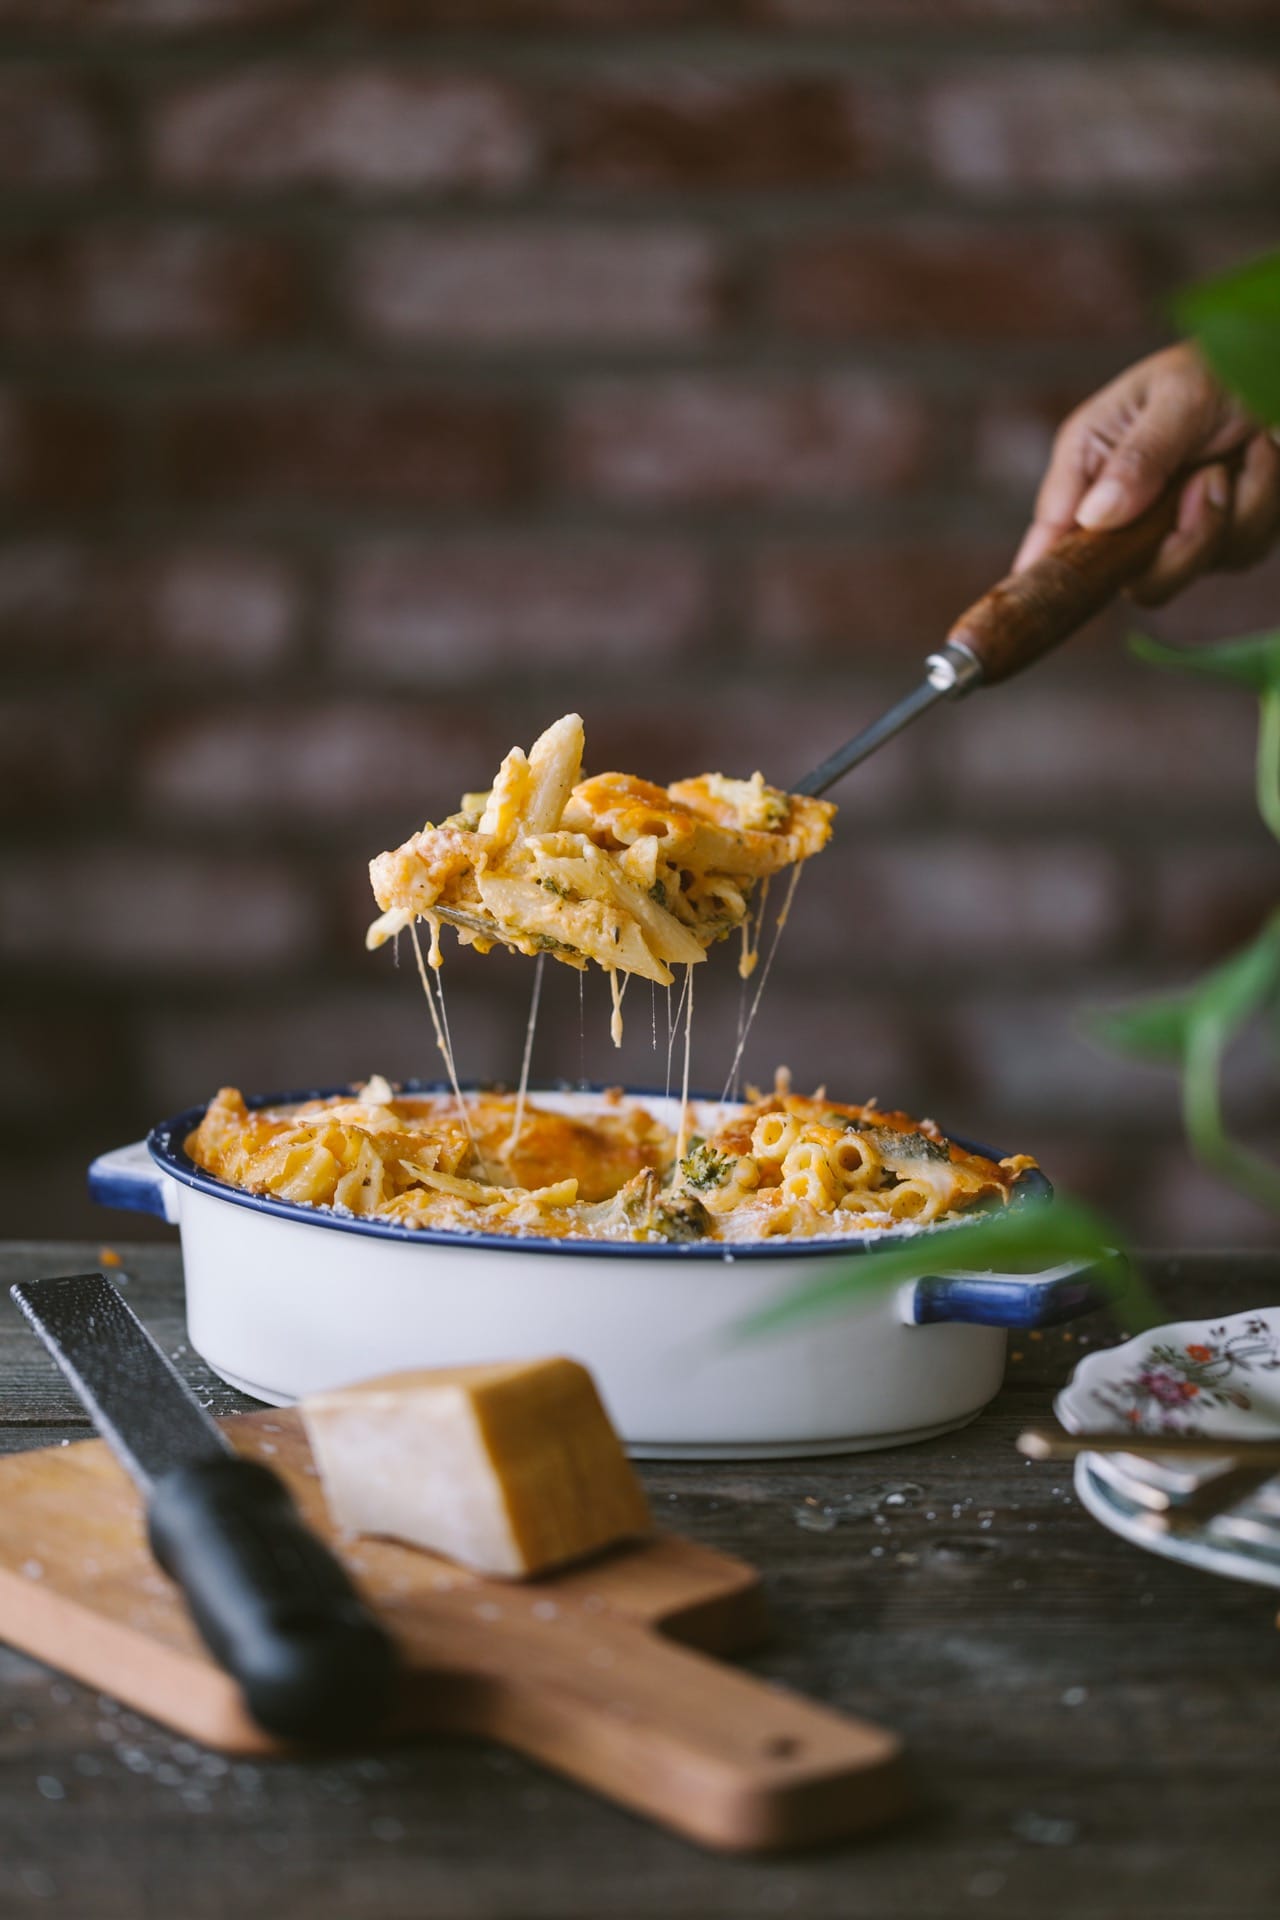 Creamy Mac and Cheese #pasta #macandcheese #foodphotography #foodstyling #bakedpasta